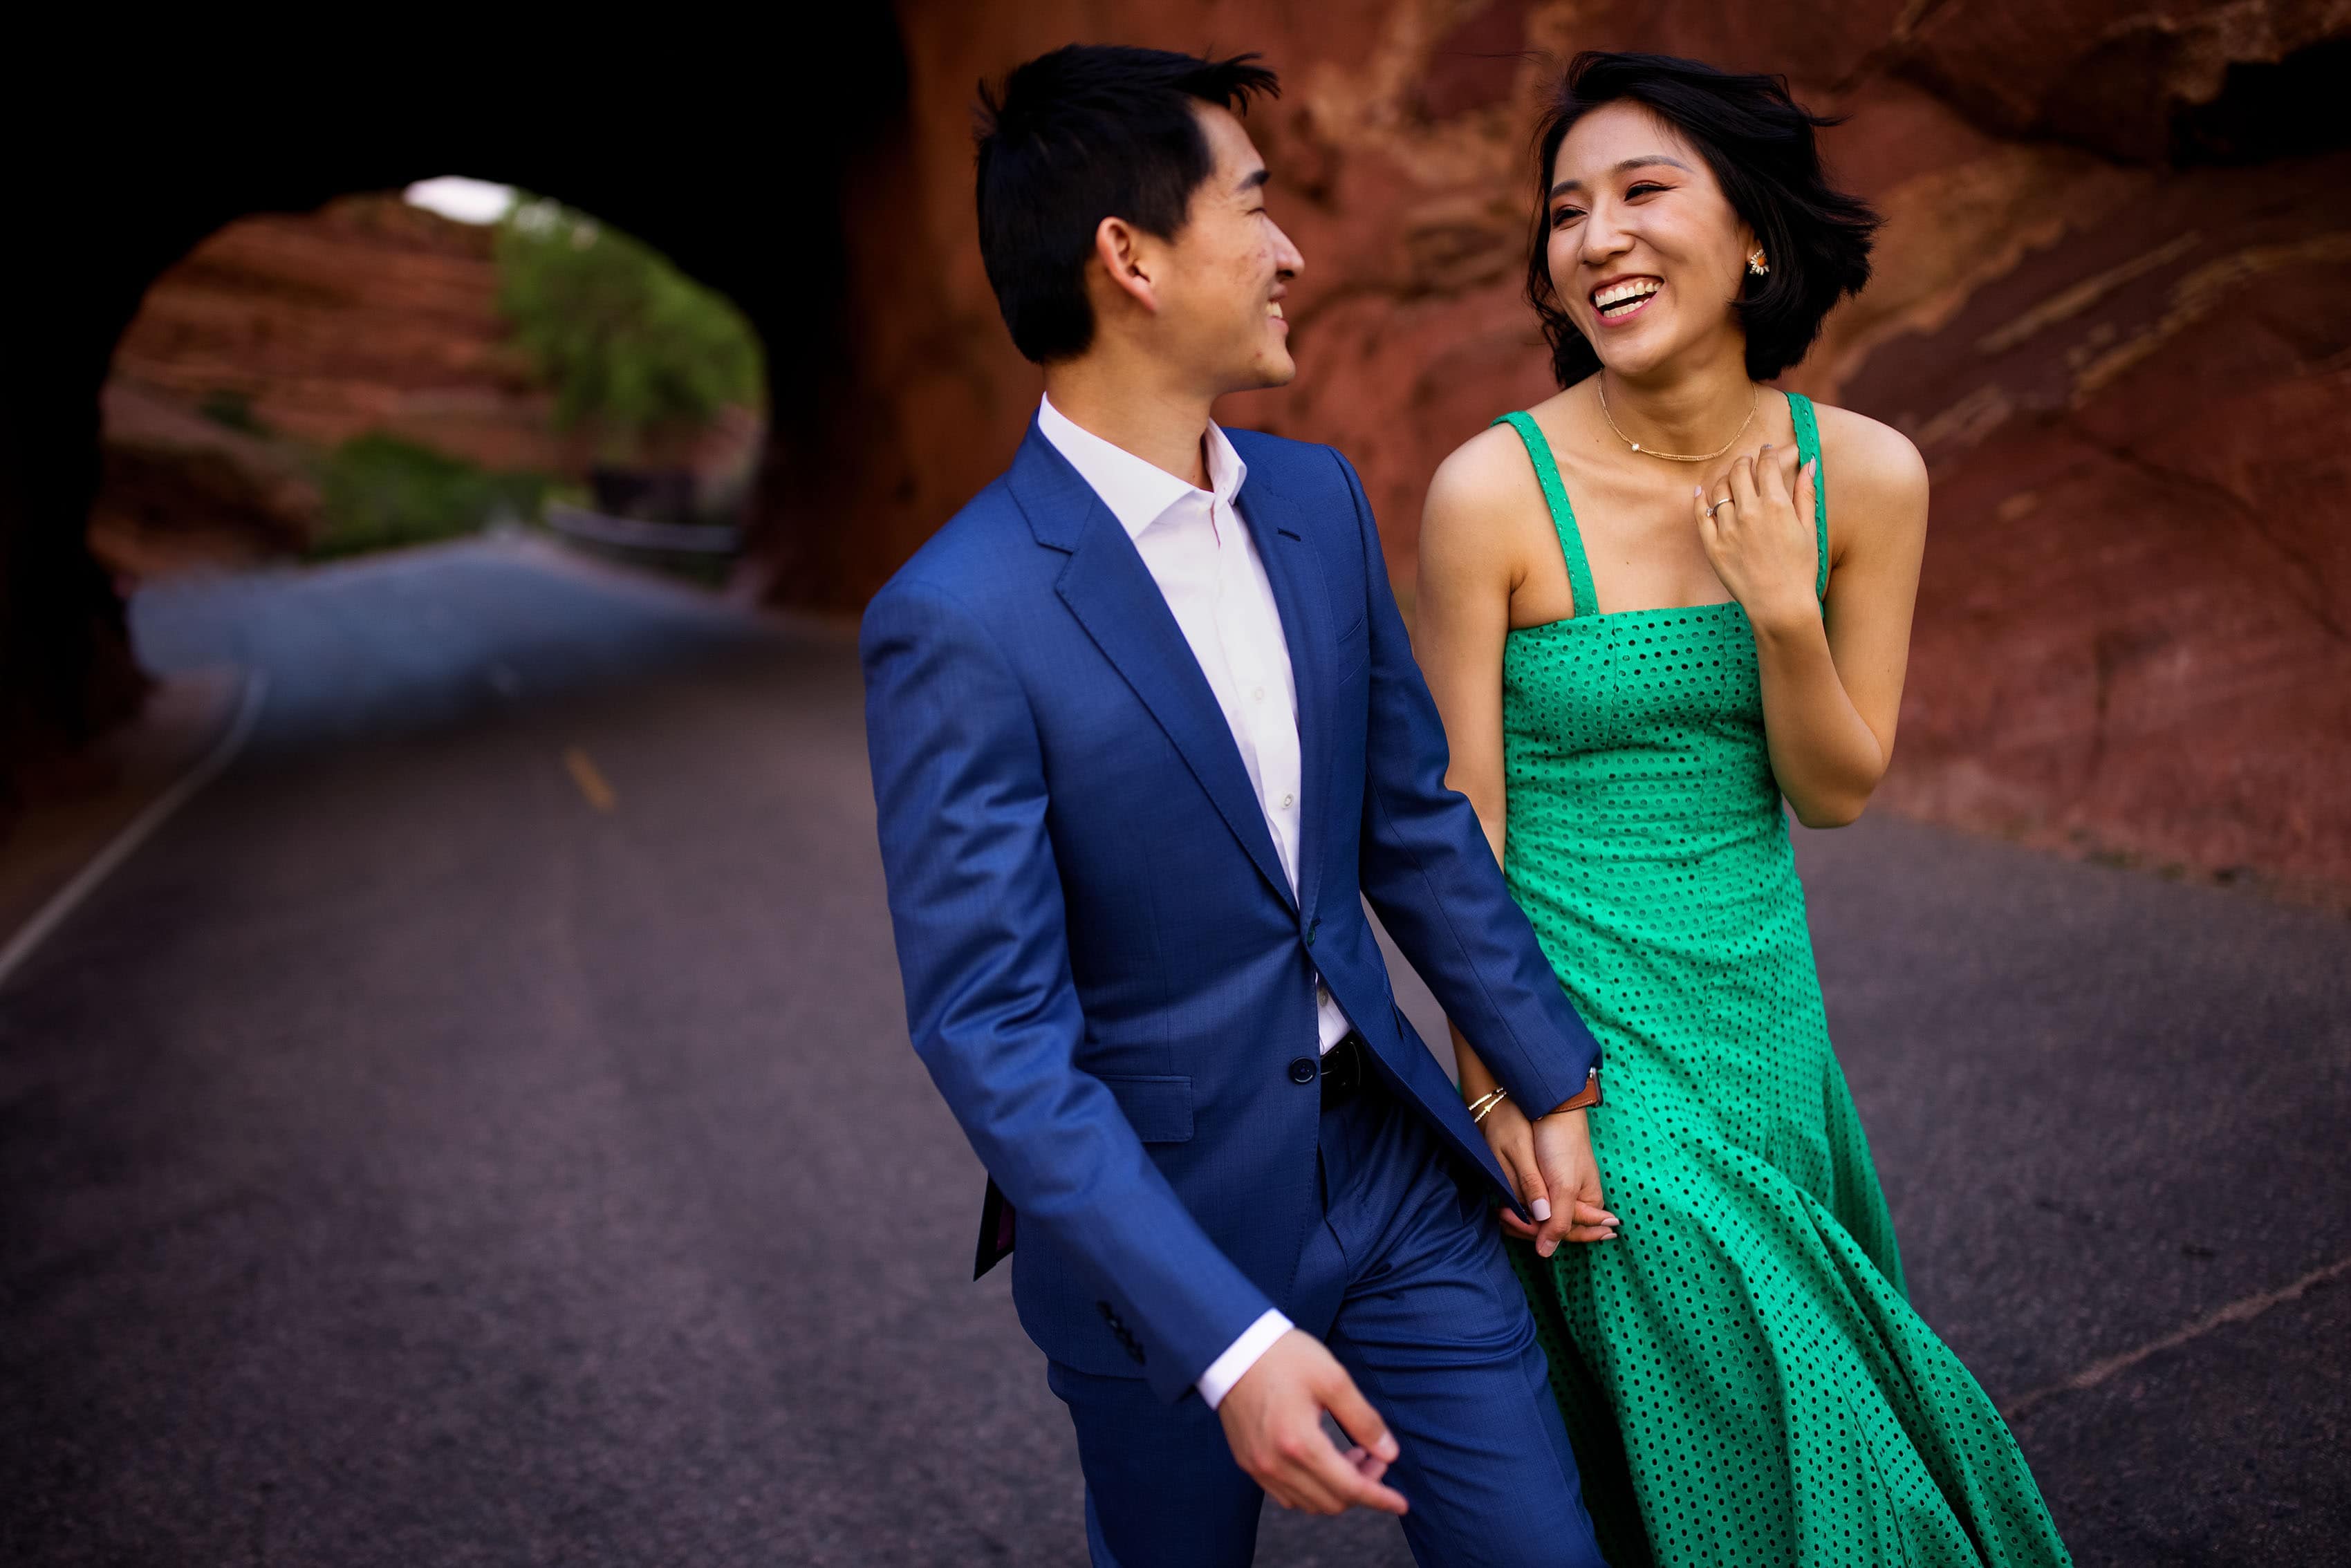 Yufan and Sunny share a moment together at Red Rocks amphitheatre during their engagement session